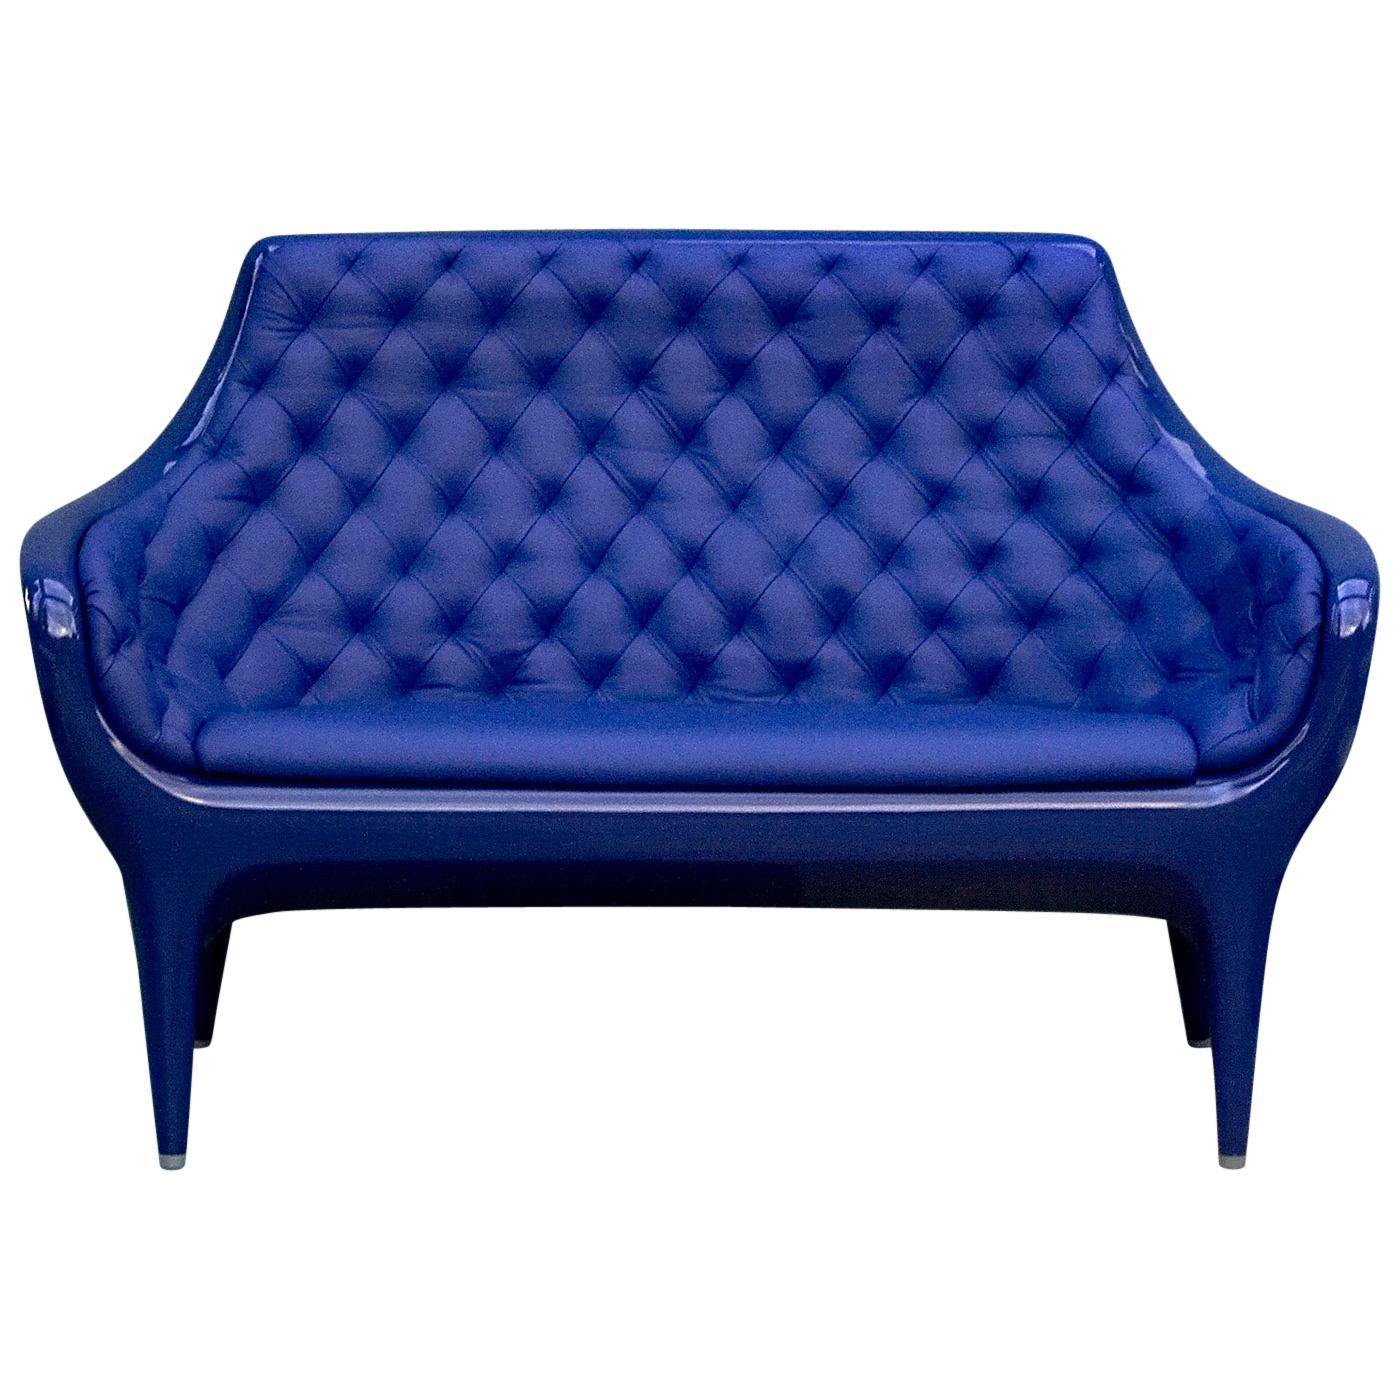 Jaime Hayon Contemporary Blue Showtime Sofa Lacquered by BD Barcelona